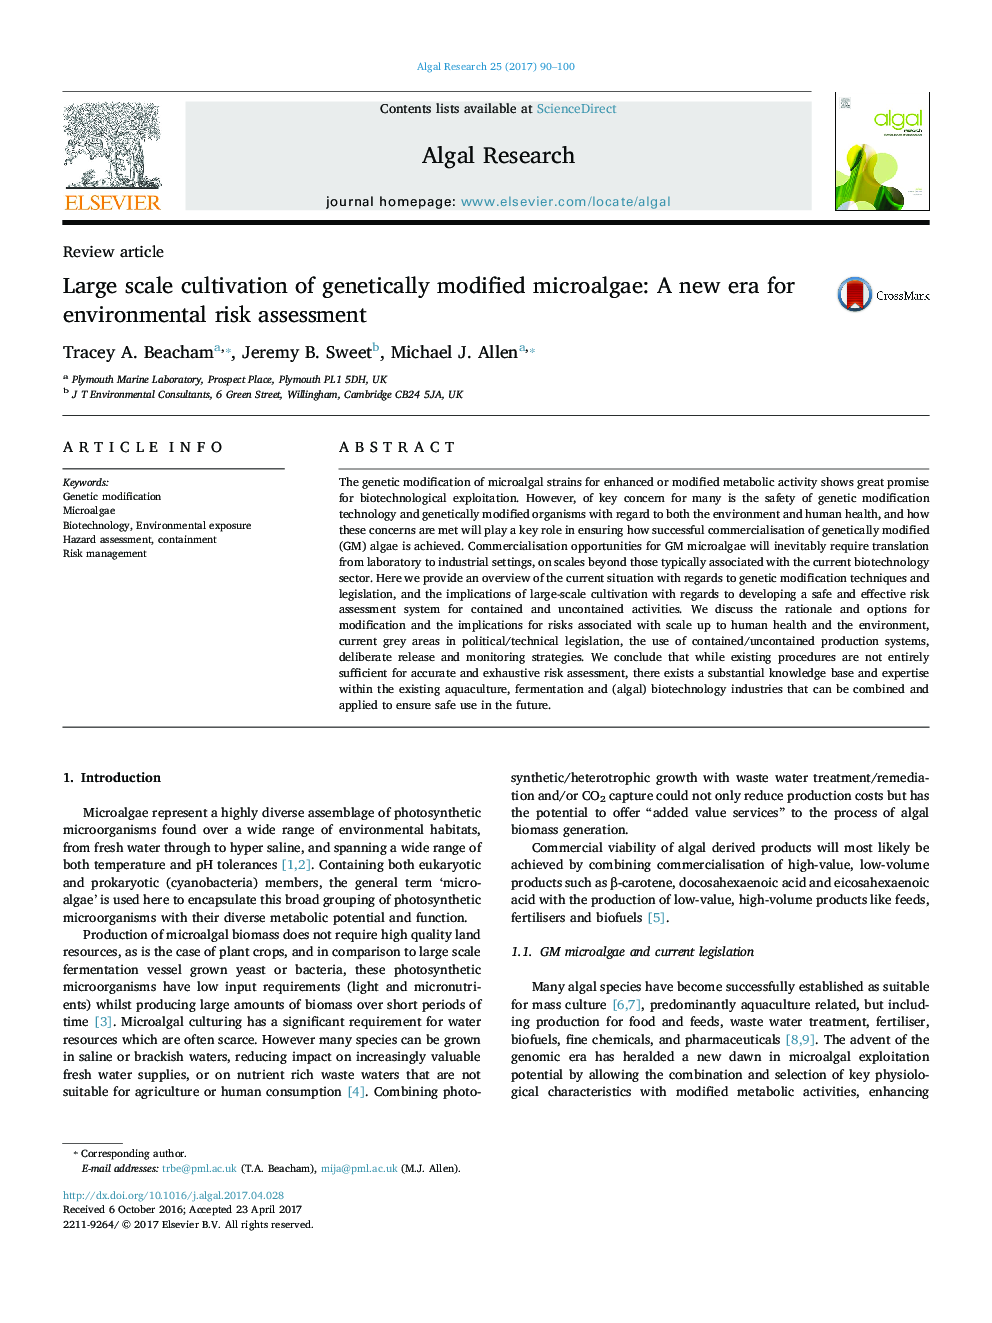 Large scale cultivation of genetically modified microalgae: A new era for environmental risk assessment